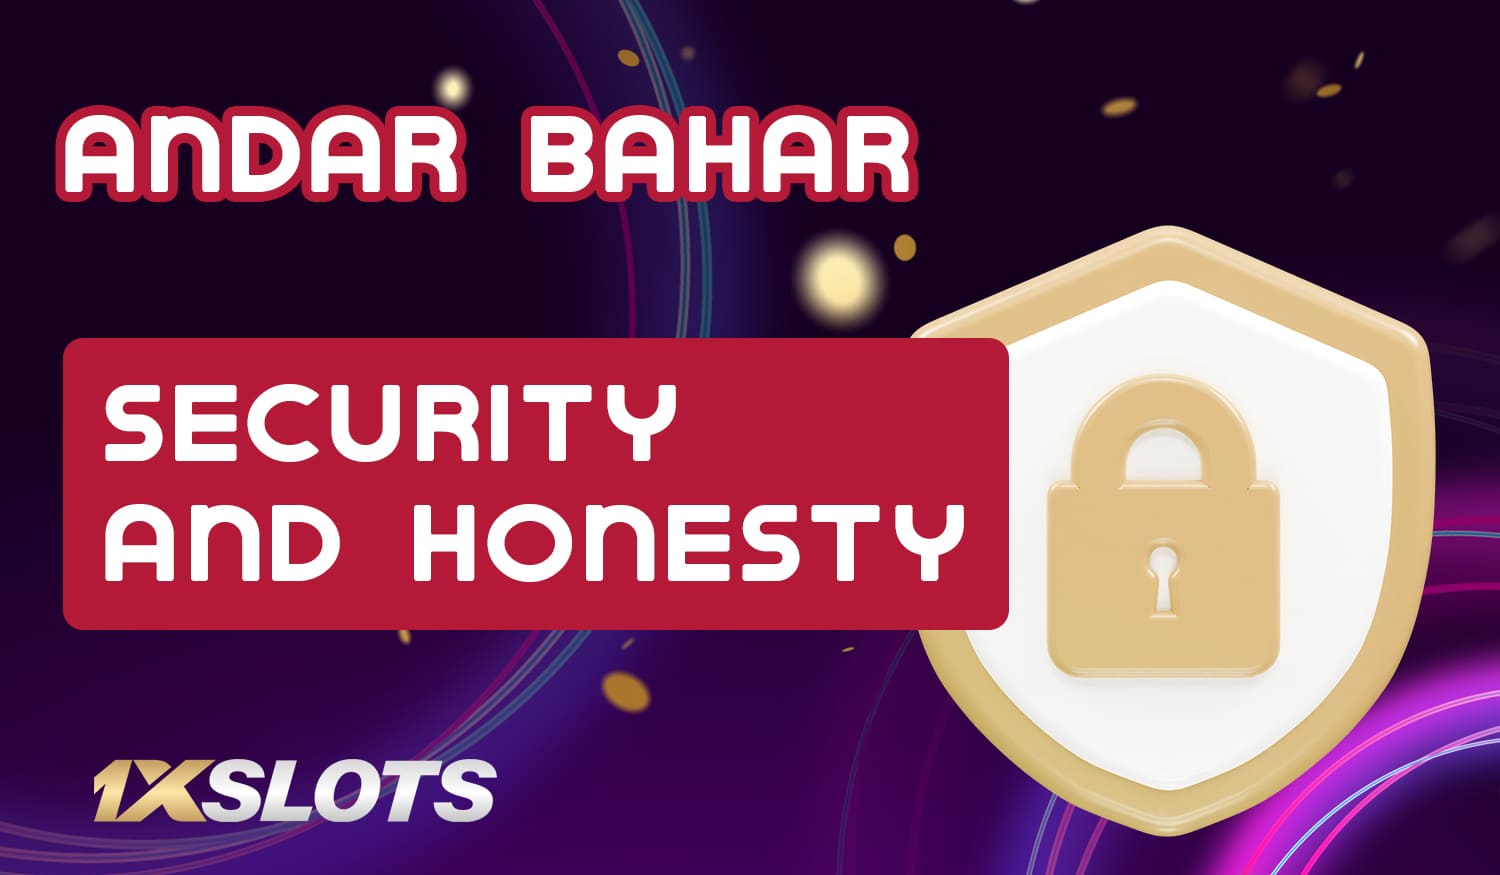 Can users from India fully trust 1Xslots casino?